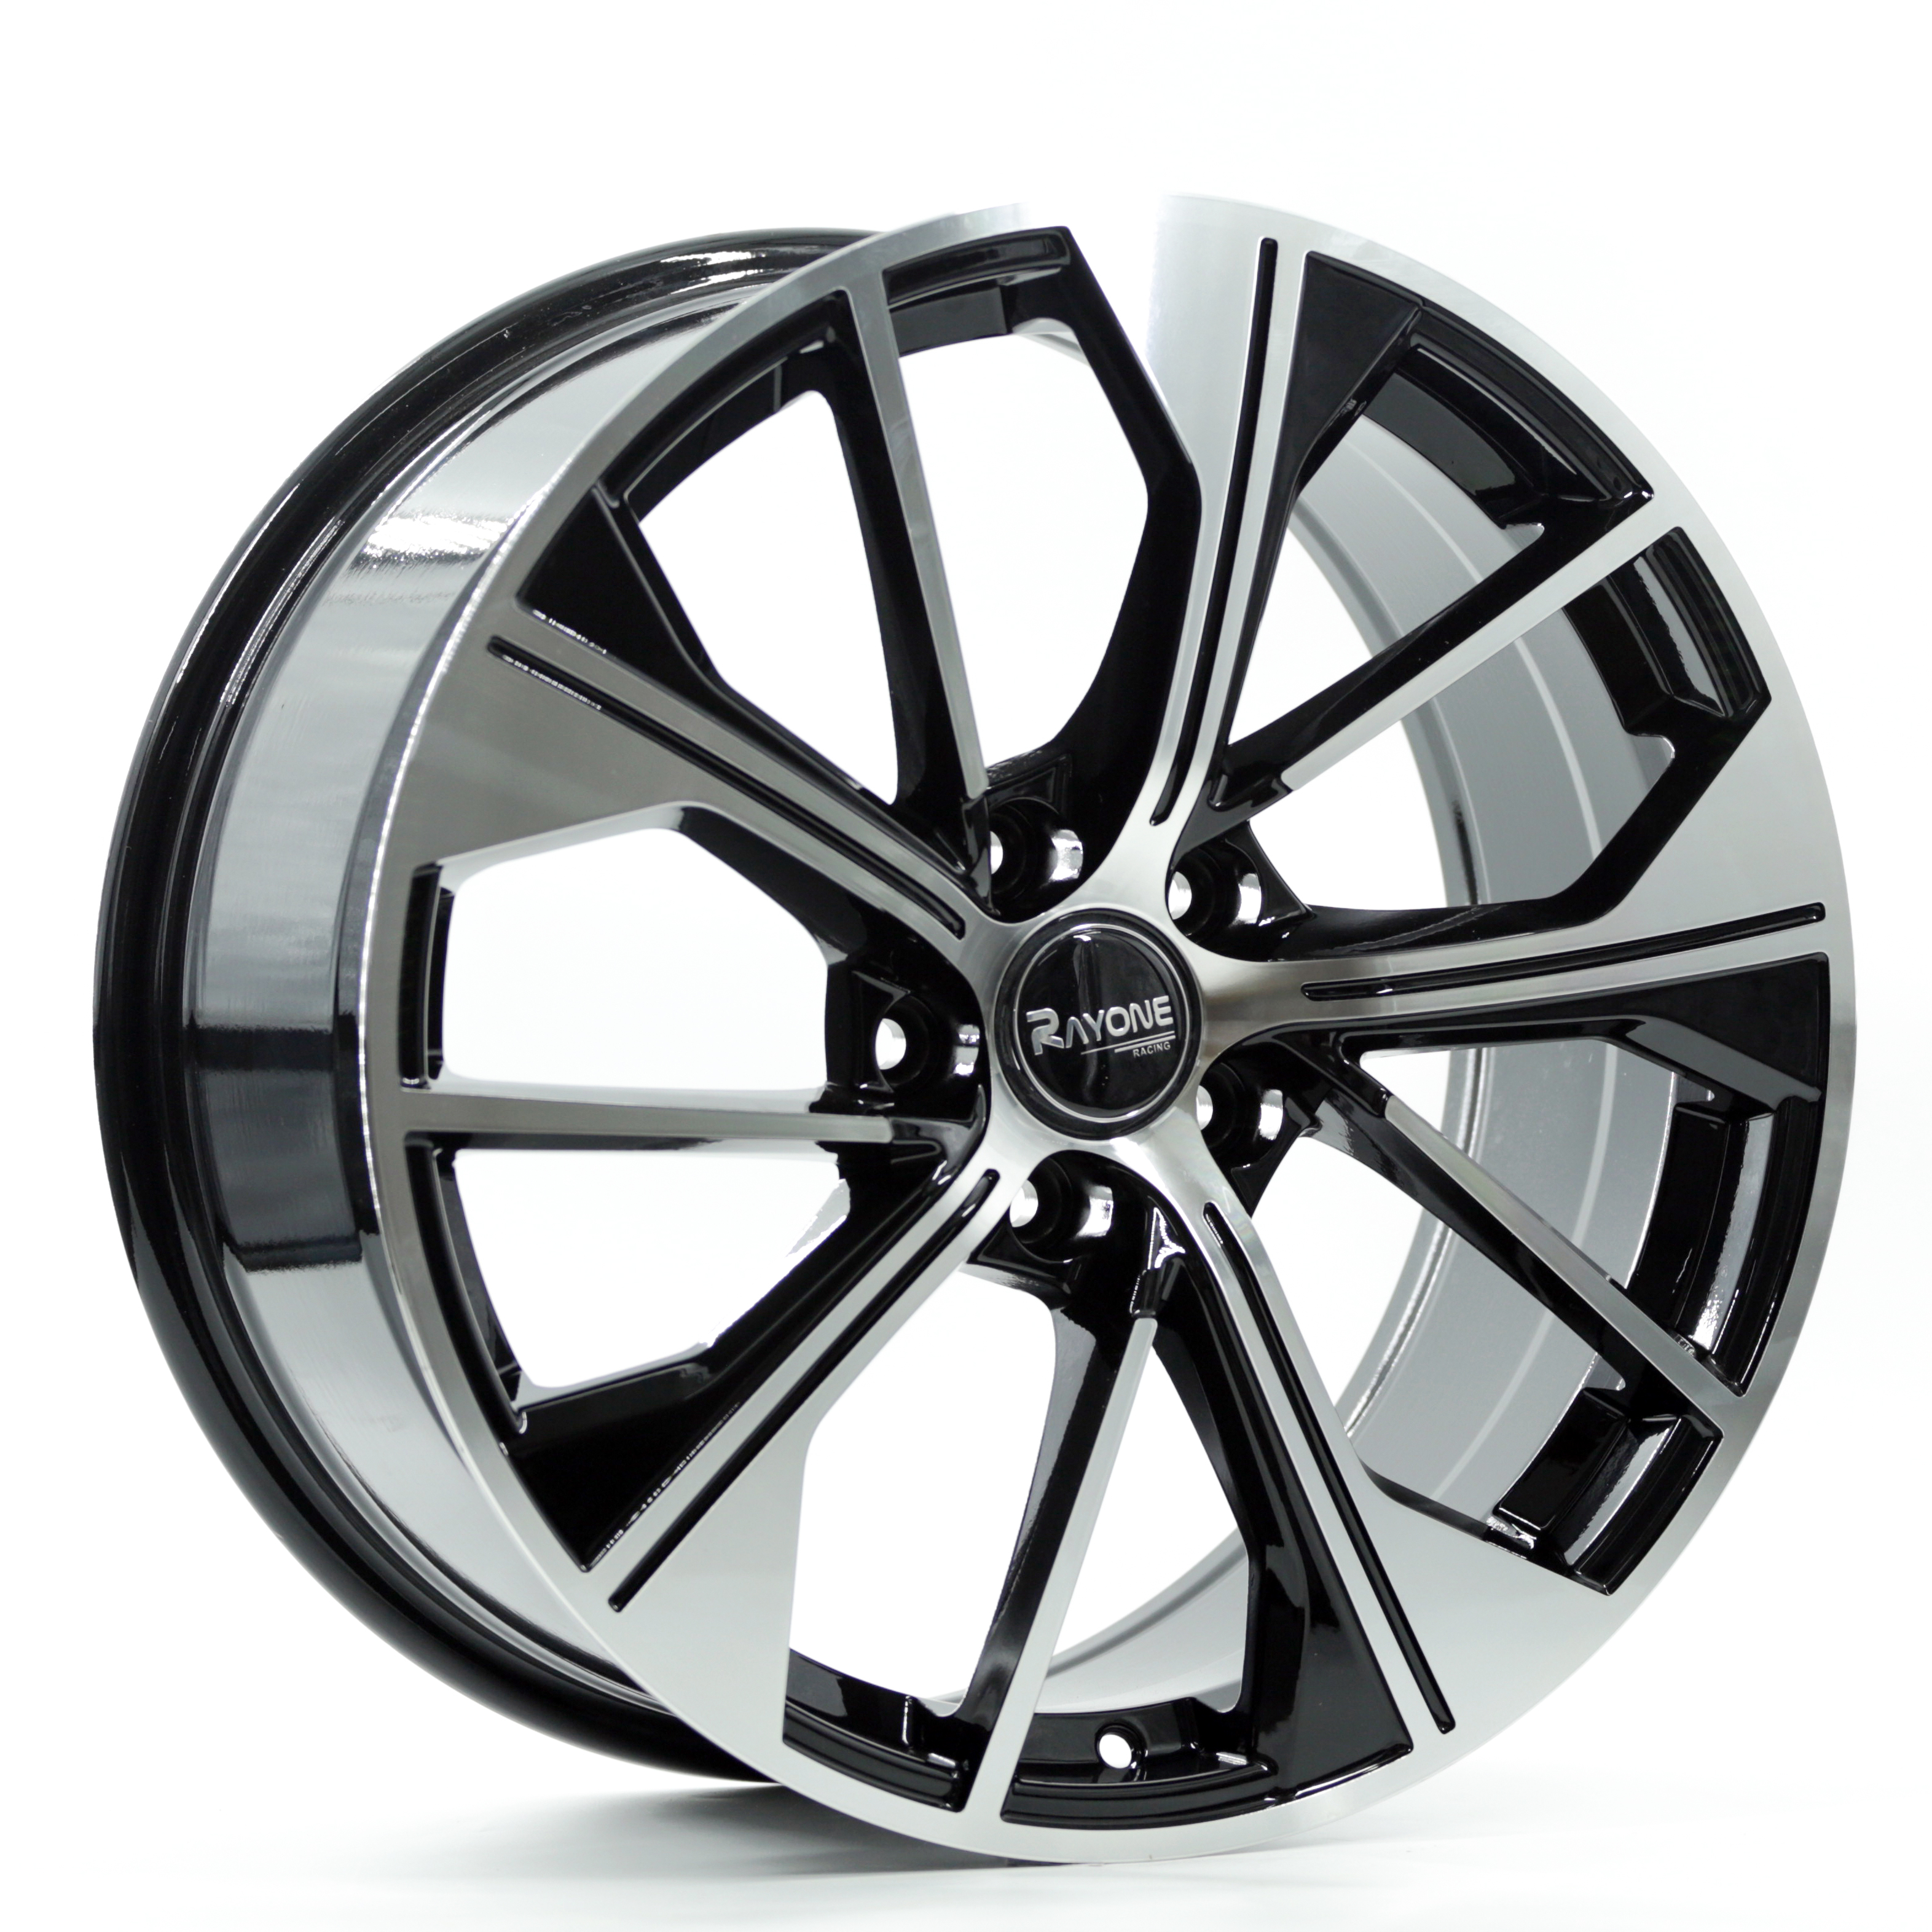 18inch Low Pressure Aluminum Alloy Wheels For Audi Replacement